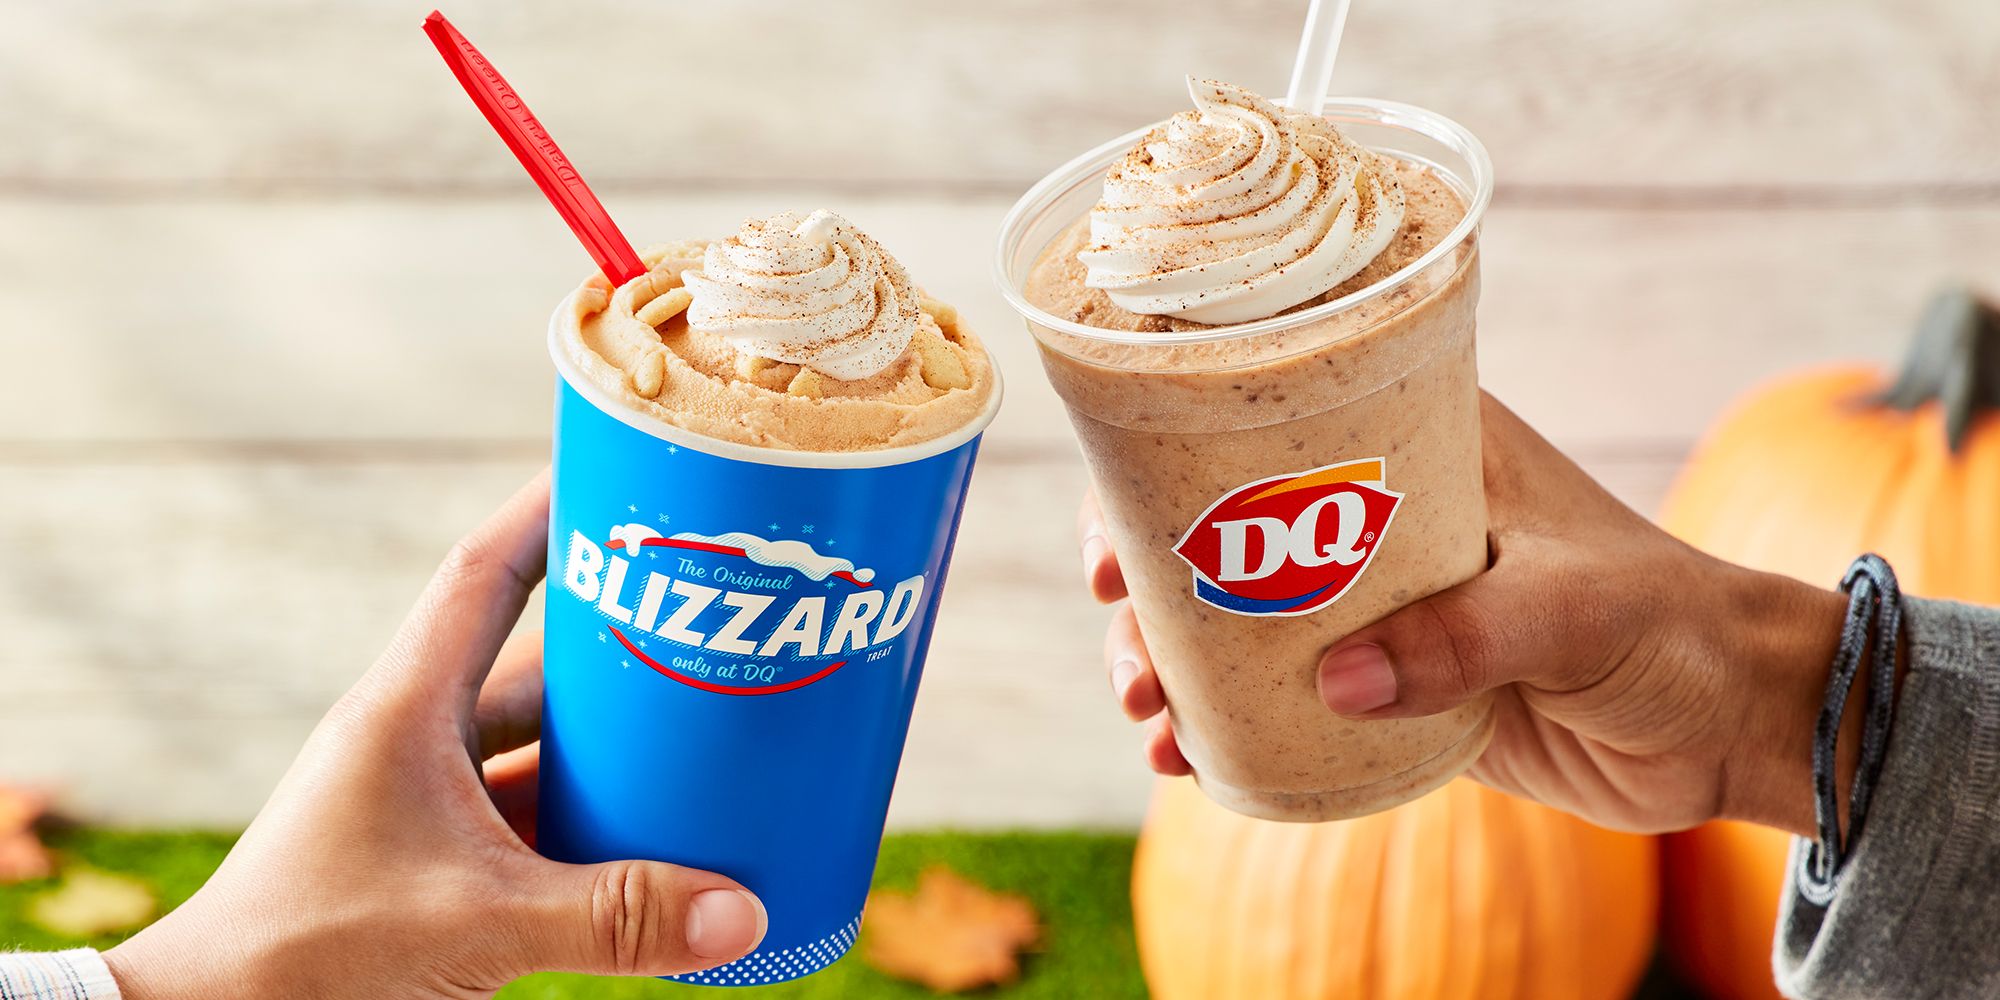 What is in a Pecan Pie Blizzard?